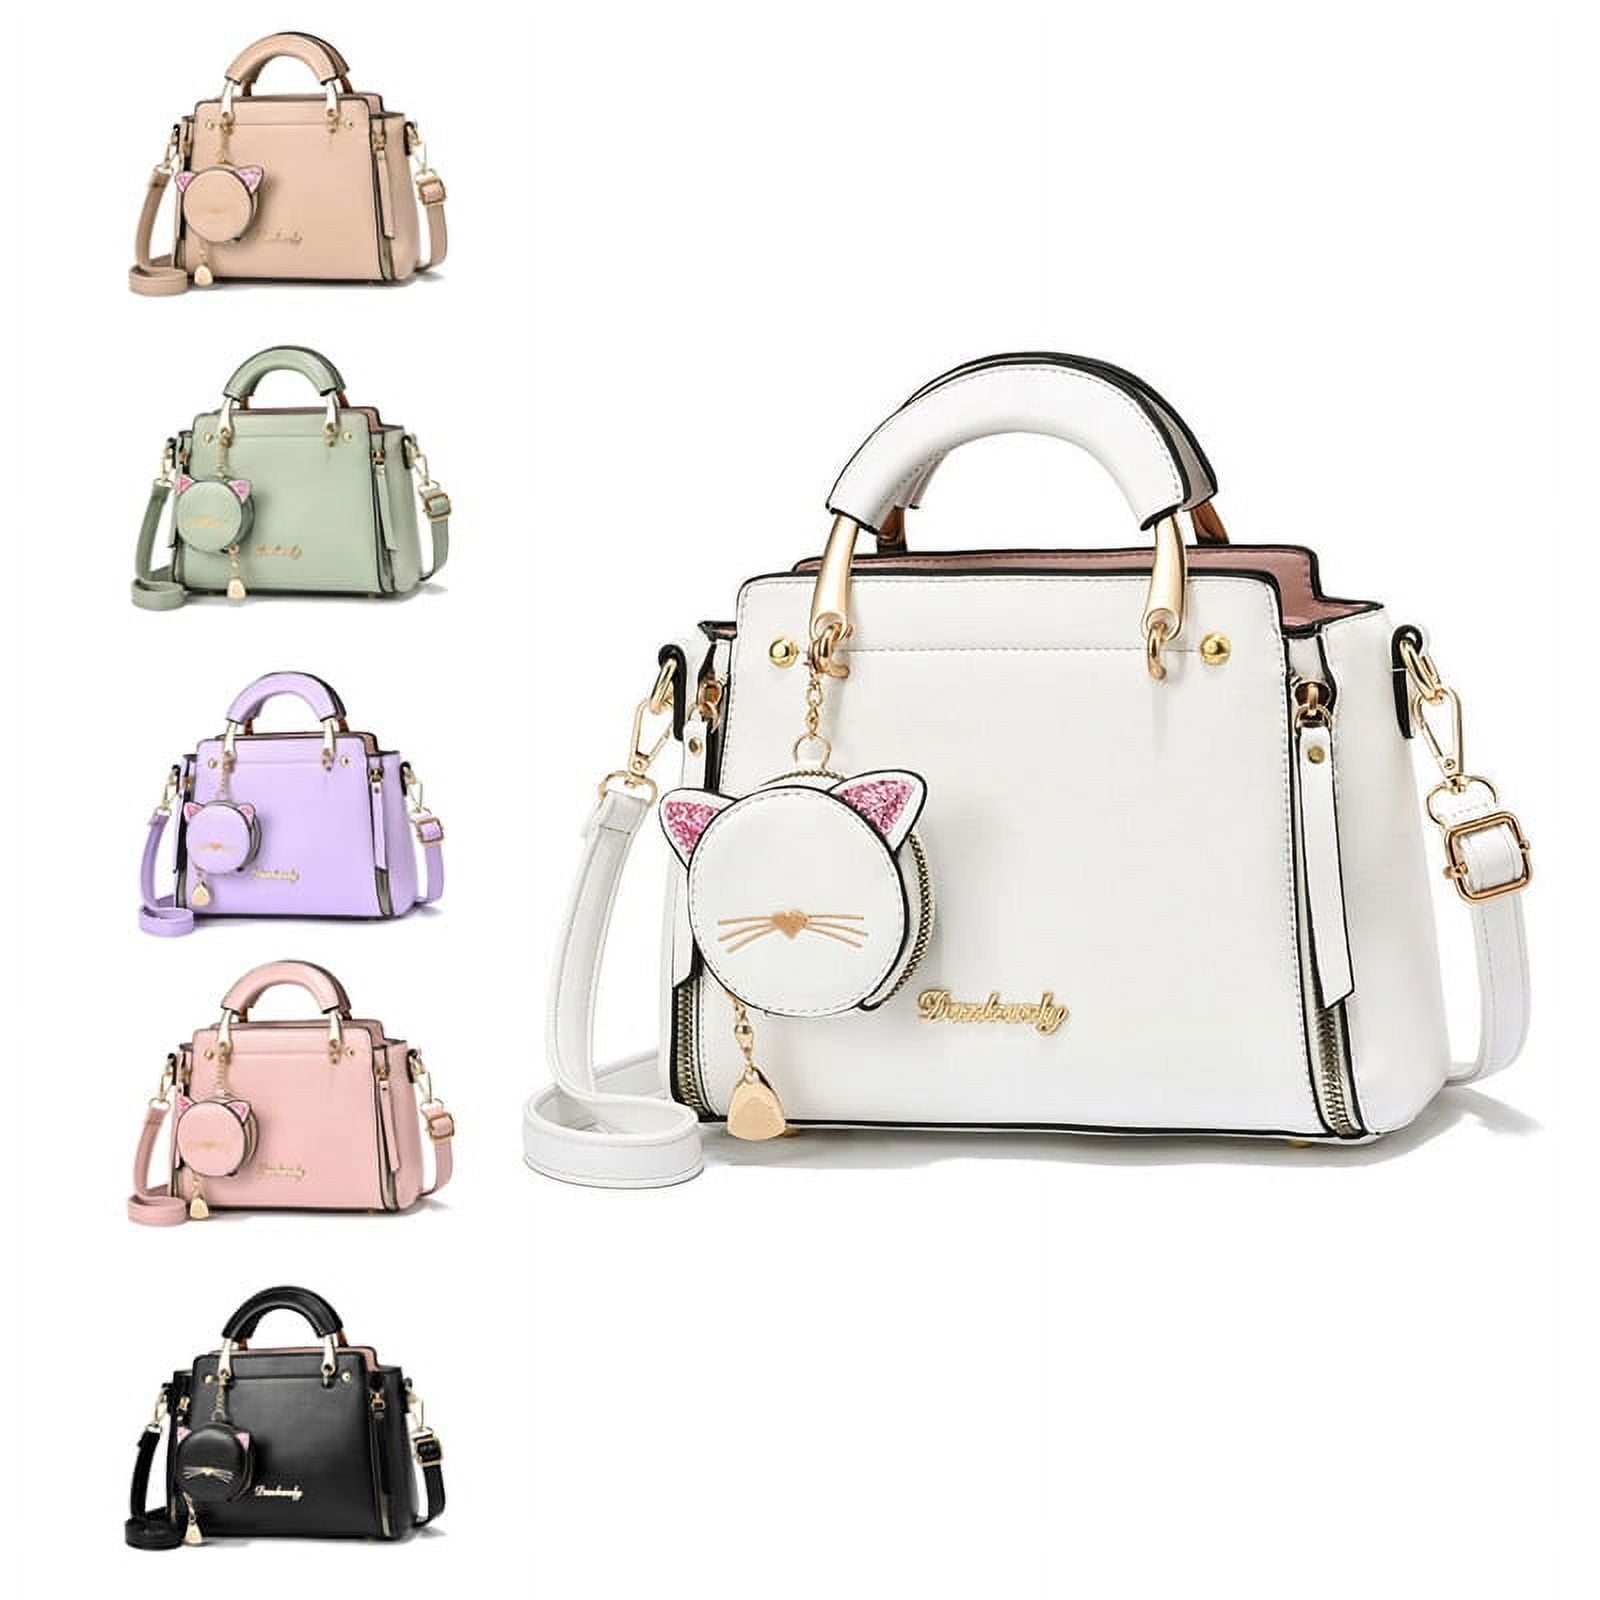 Fashion Cross Body Briefcases Purses Handbags Men Ladies Bags Messenger Bag  PU Leather Pillow Female Totes Shoulder Handbag 2 SIZE With Dust Bag JN8899  From Jn8899, $13.73